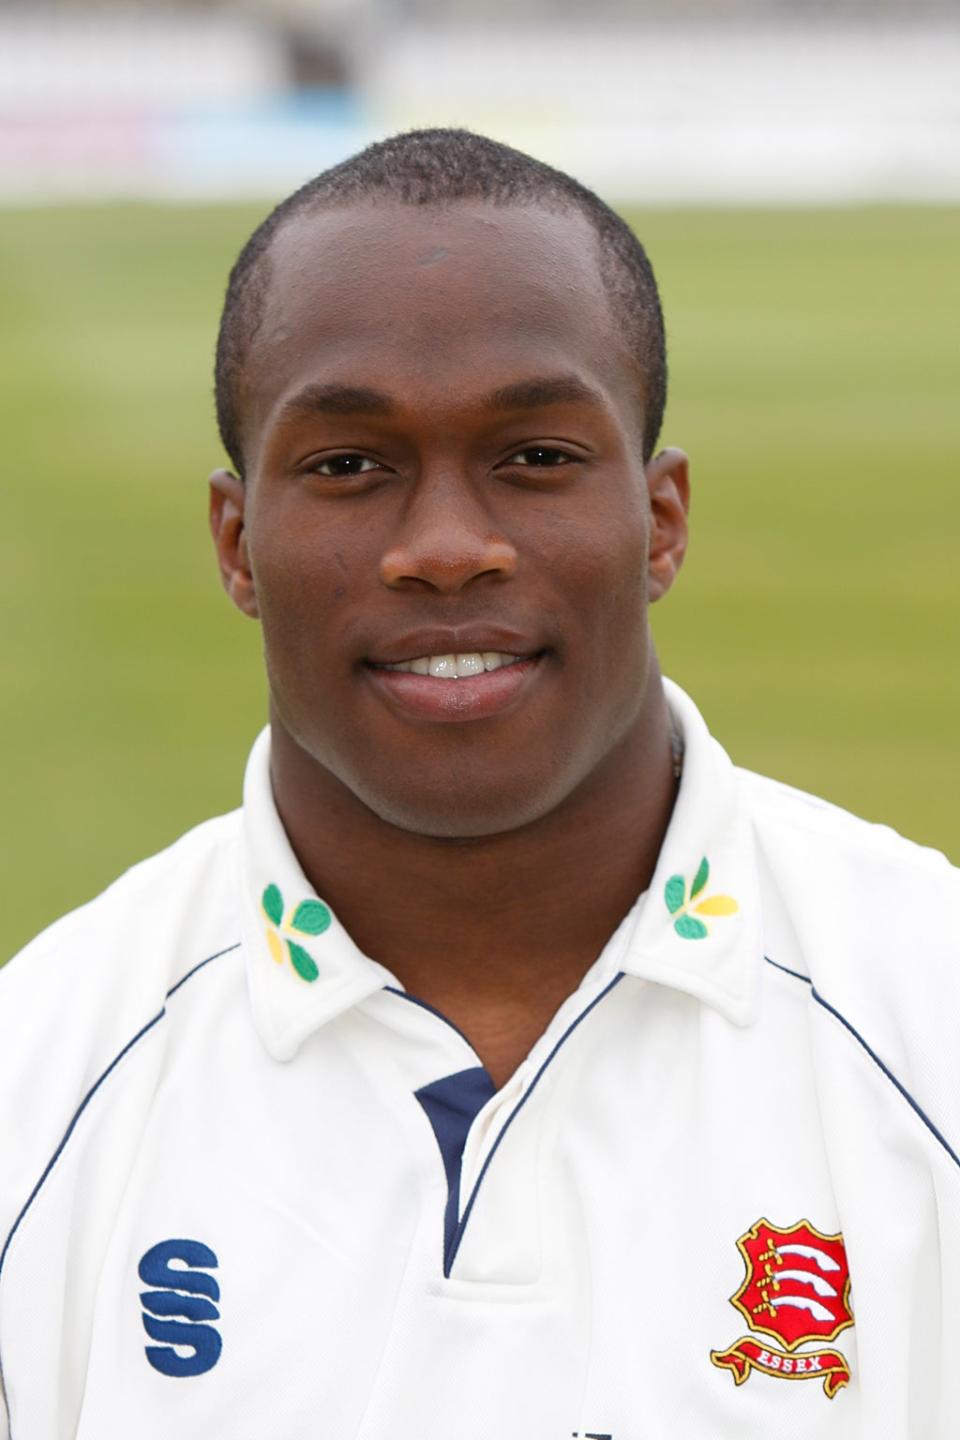 Former Essex player Maurice Chambers has spoken about his experiences of racism in cricket (Sean Dempsey/PA). (PA Wire)